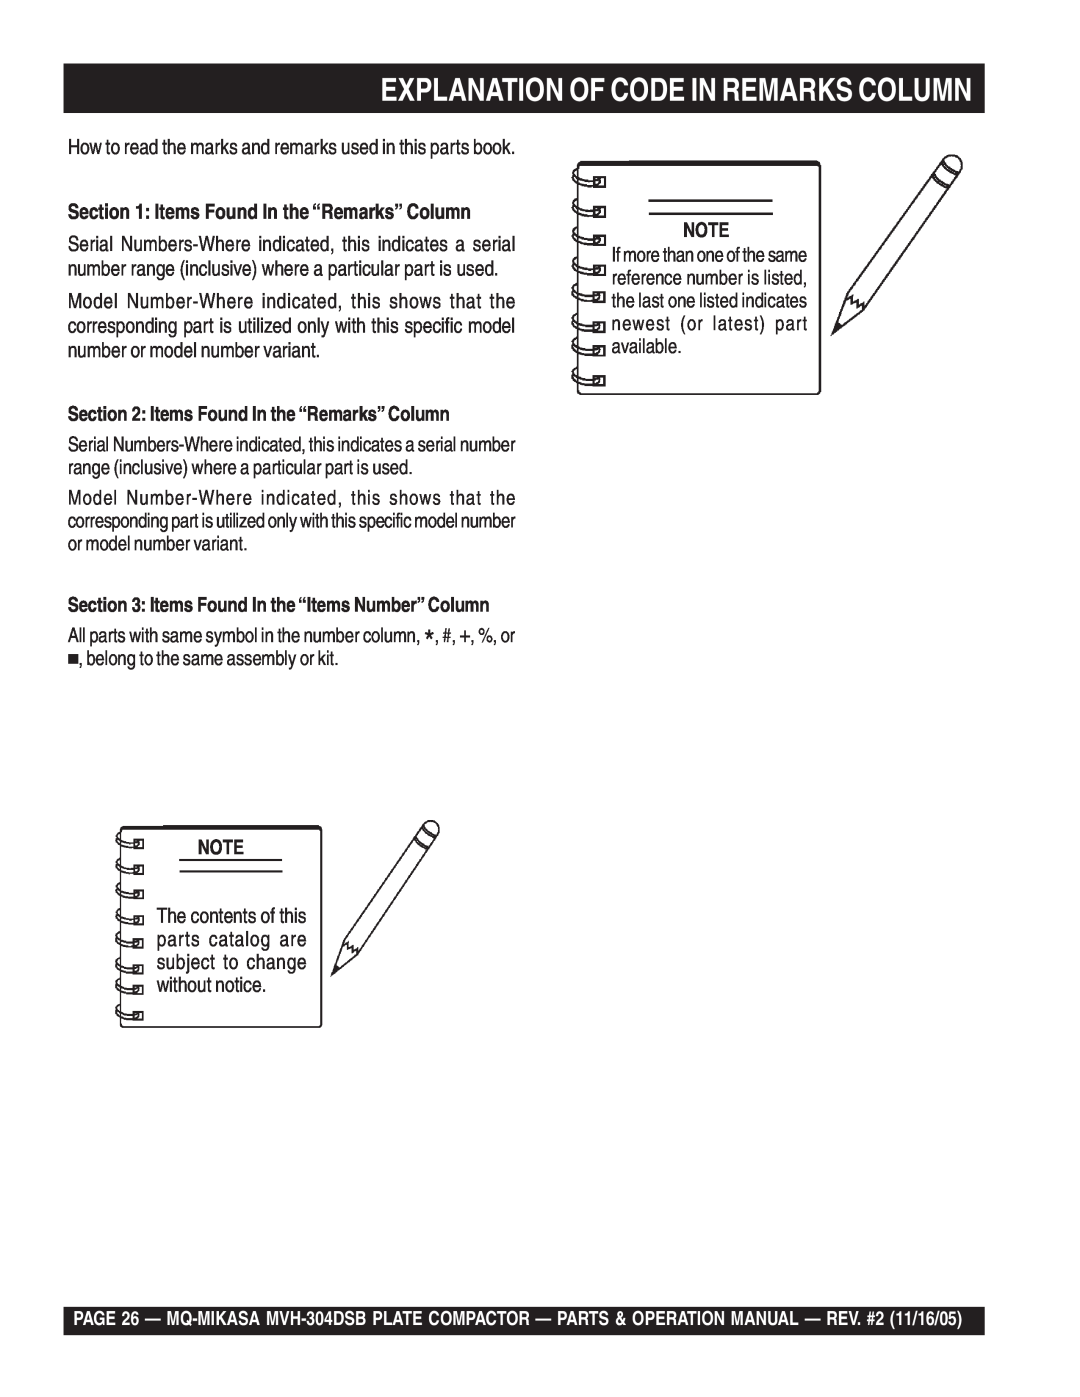 Multiquip MVH-304DSB operation manual Explanation Of Code In Remarks Column, Items Found In the “Remarks” Column 